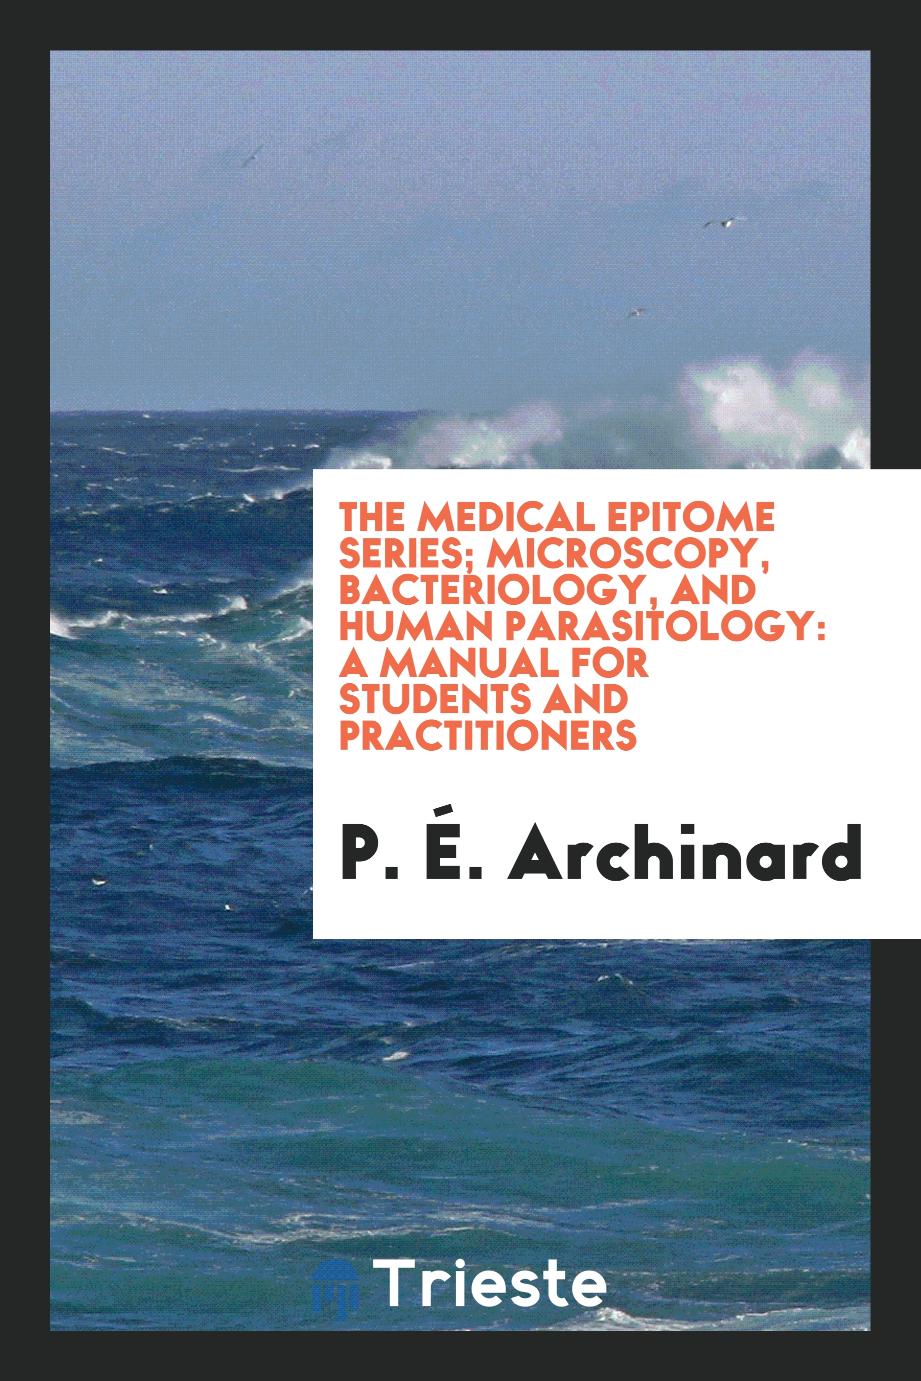 The Medical Epitome Series; Microscopy, bacteriology, and human parasitology: a manual for students and practitioners